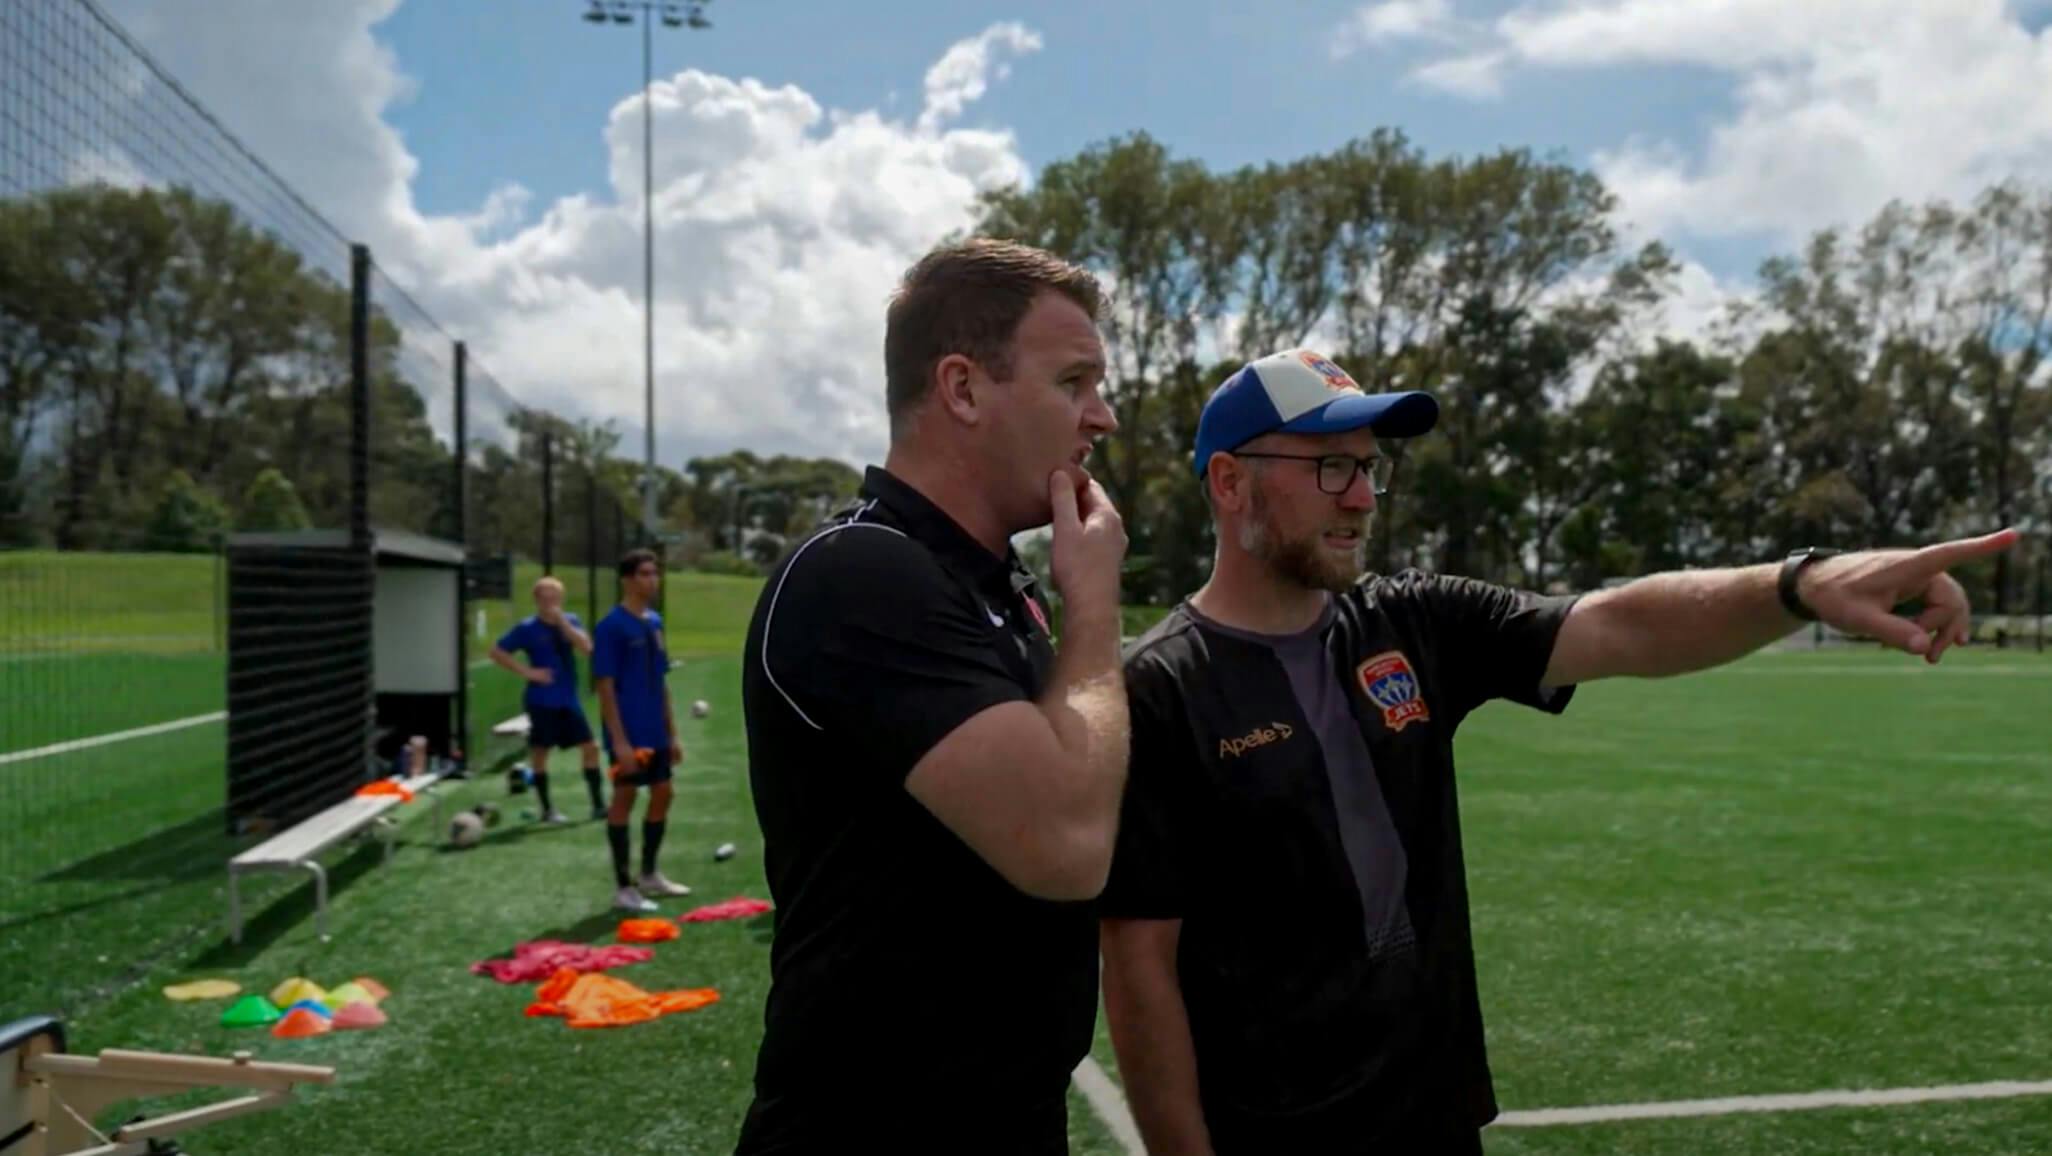 Coaches from Northern NSW engaged in a discussion and pointing at something on the field